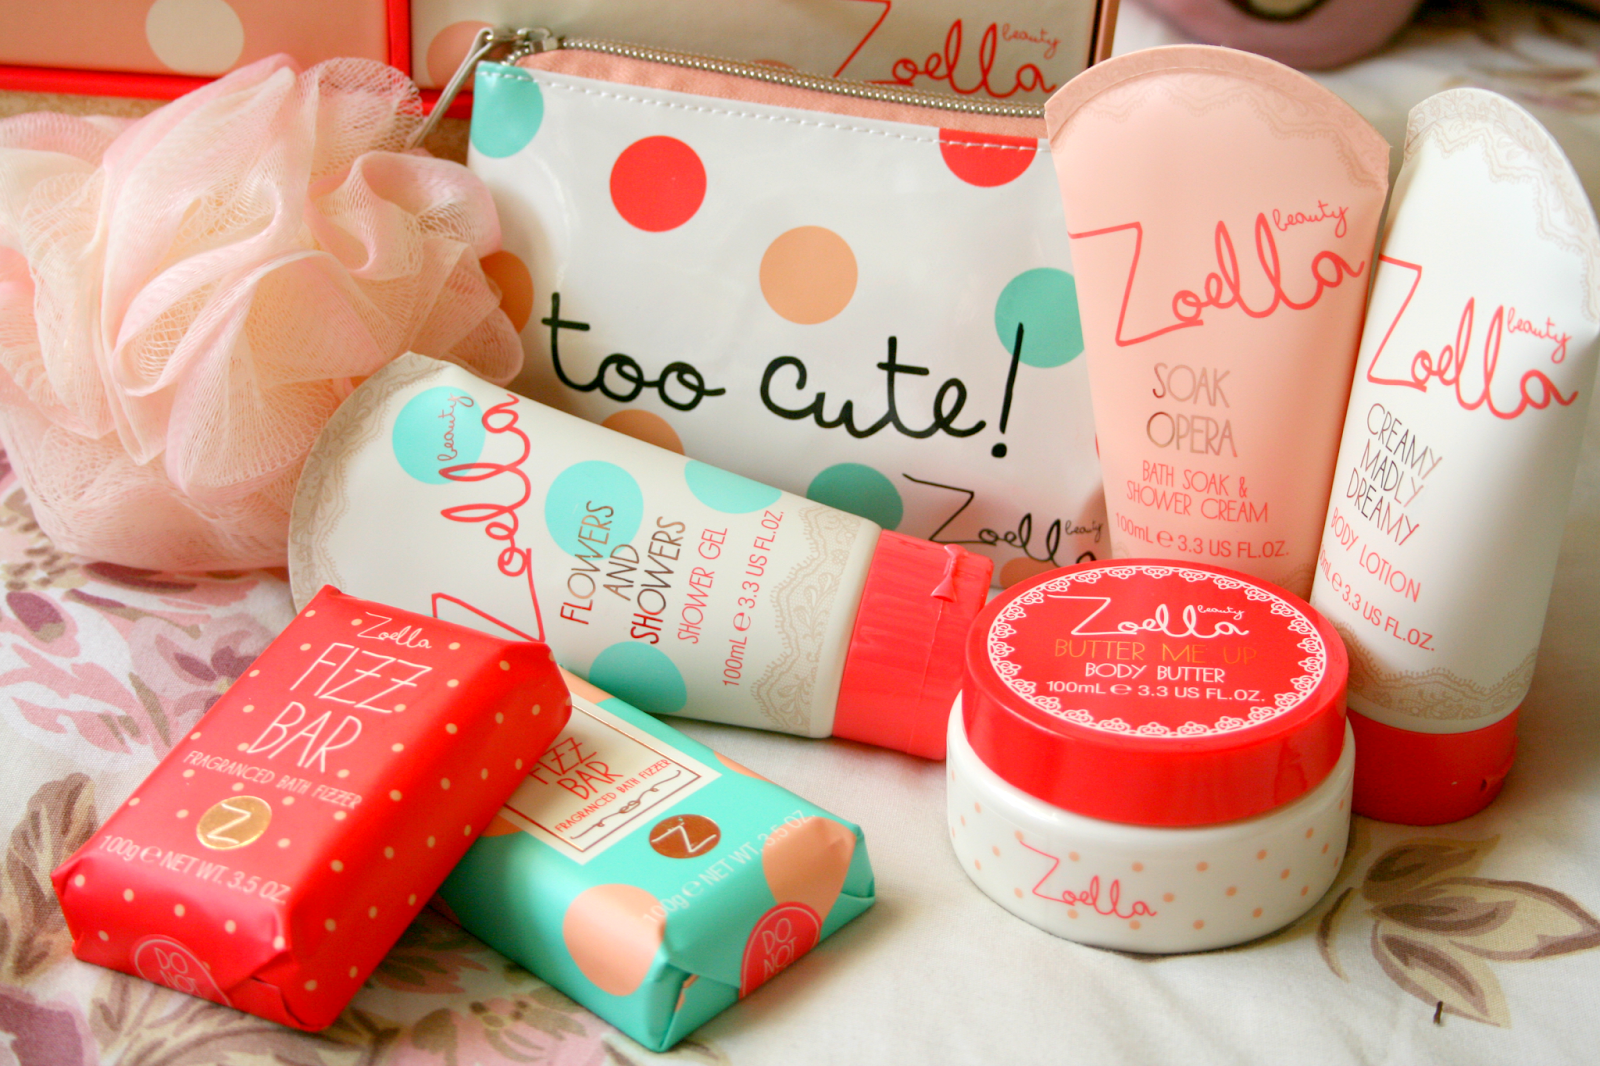 Zoella Beauty Awesome Drawersome Bathing Collection